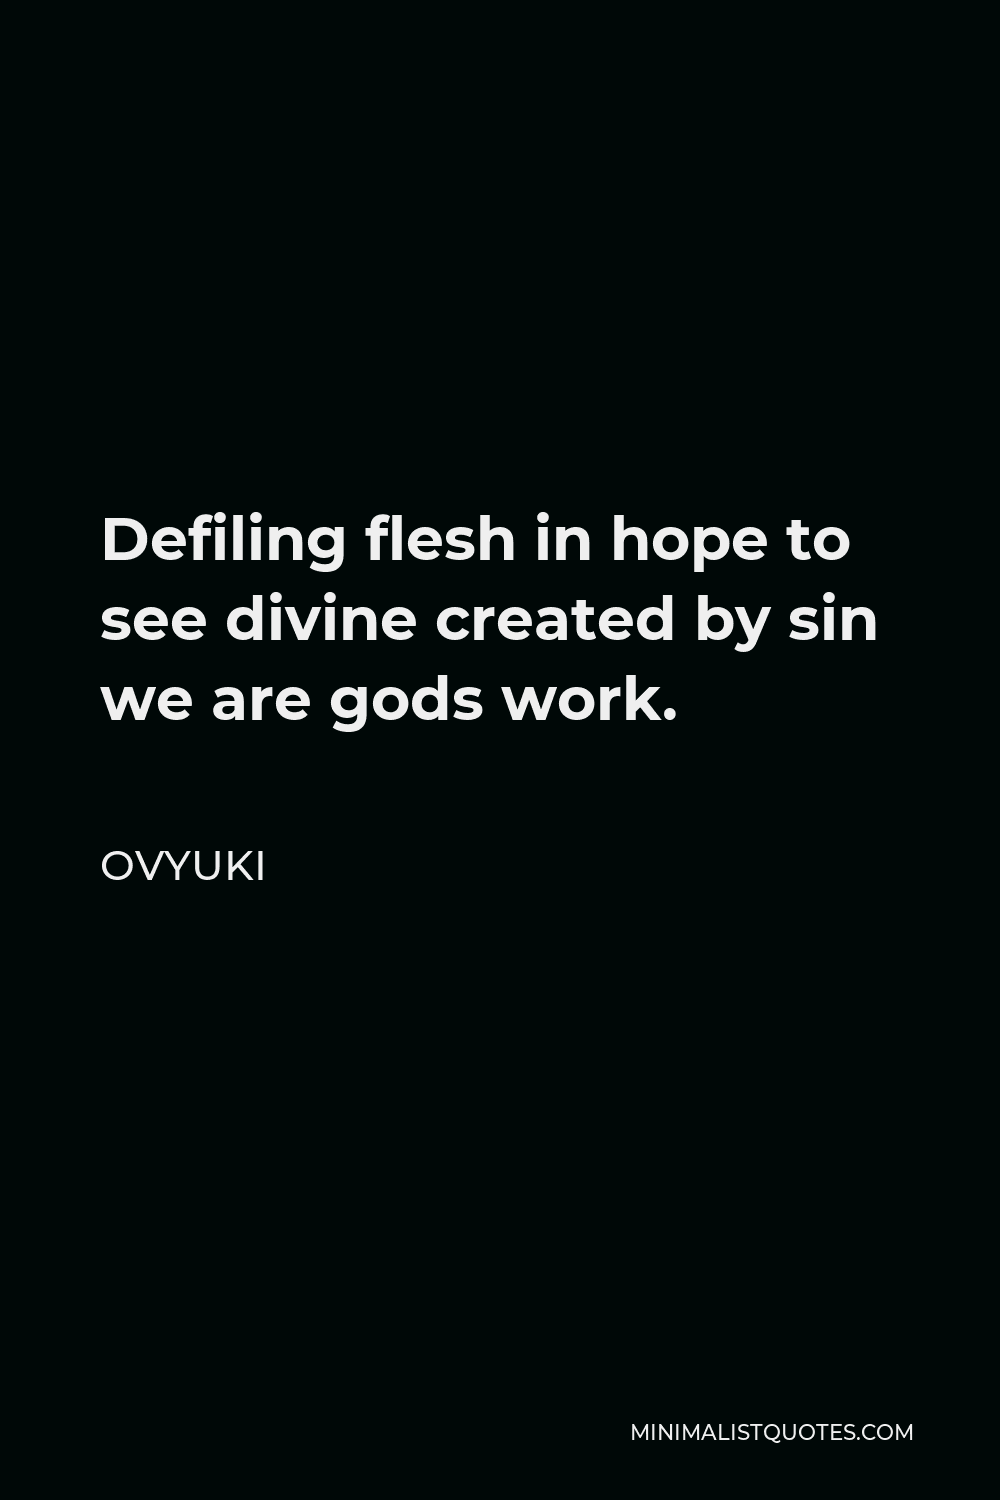 Ovyuki Quote - Defiling flesh in hope to see divine created by sin we are gods work.